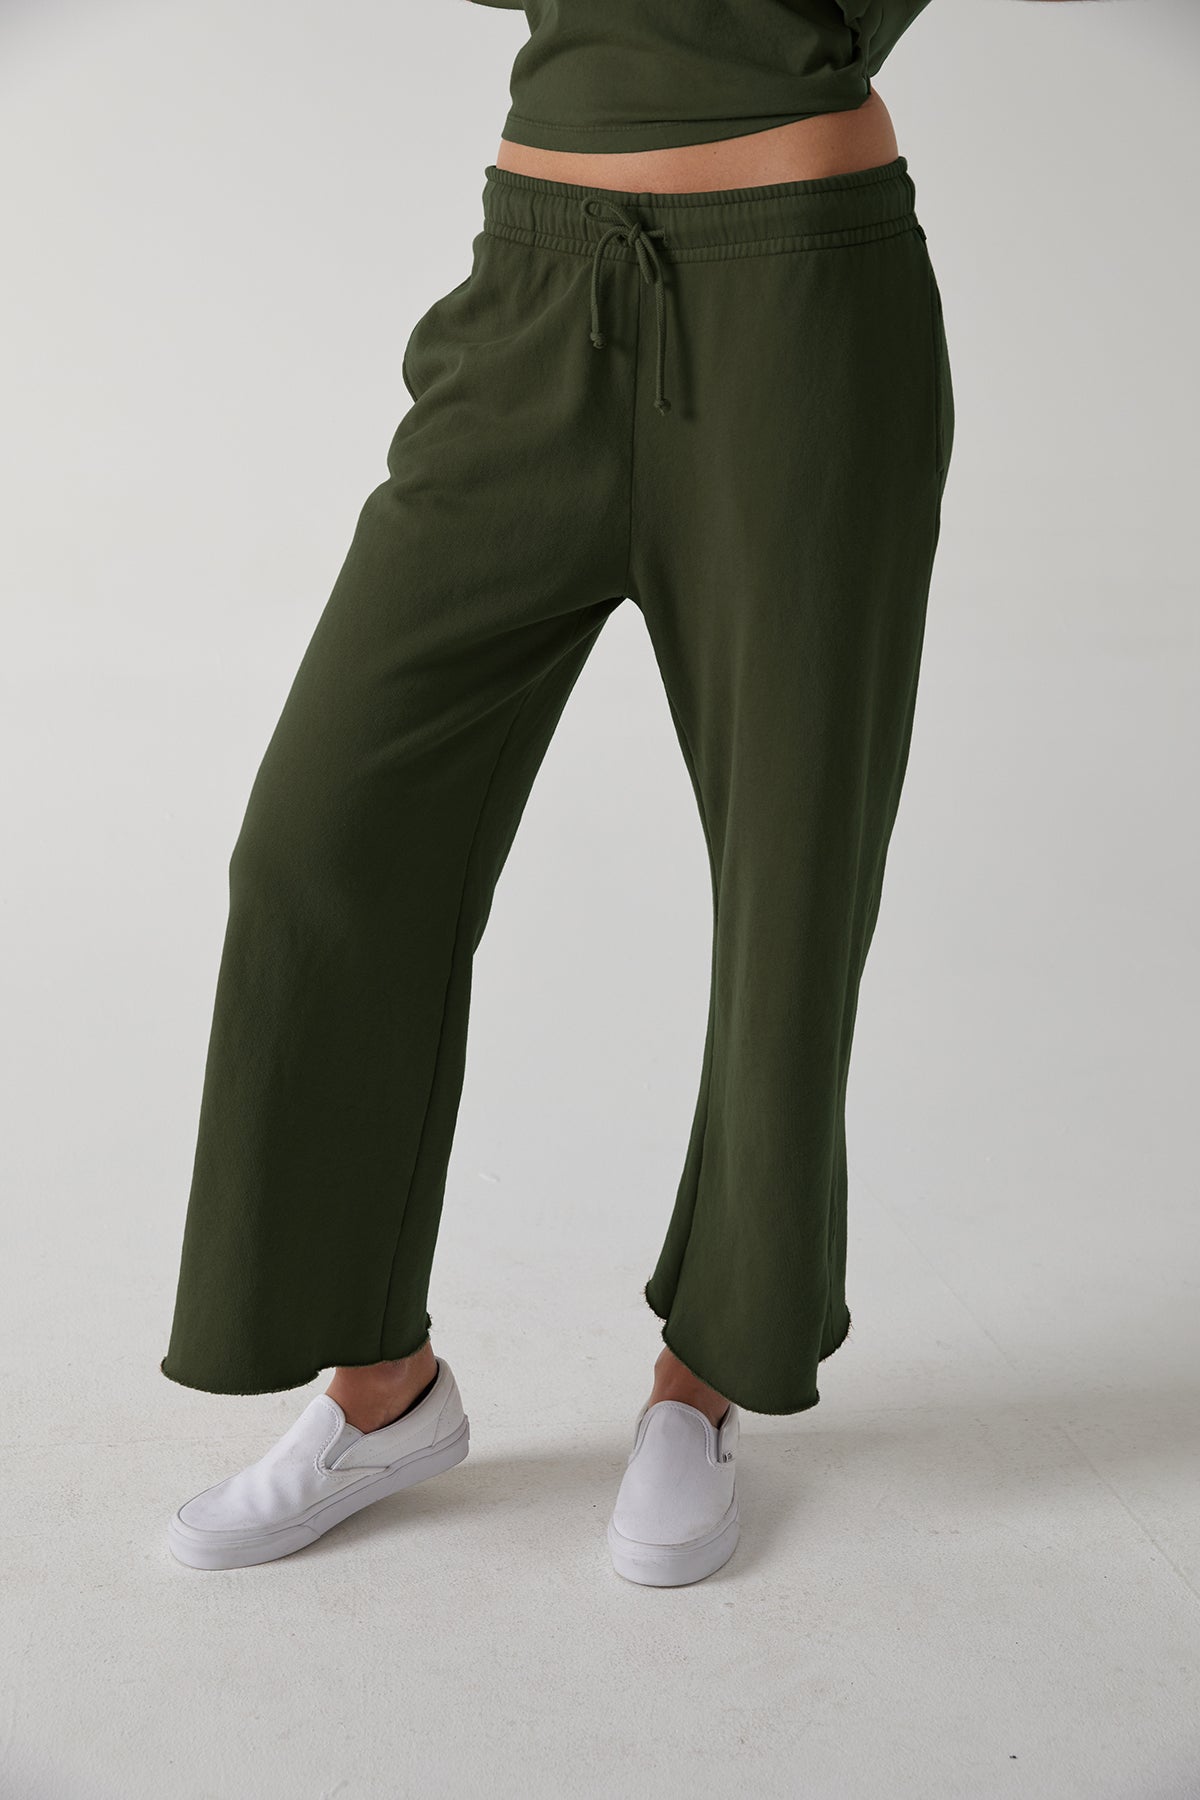 Montecito Sweatpant in dillweed green front-24331160846529